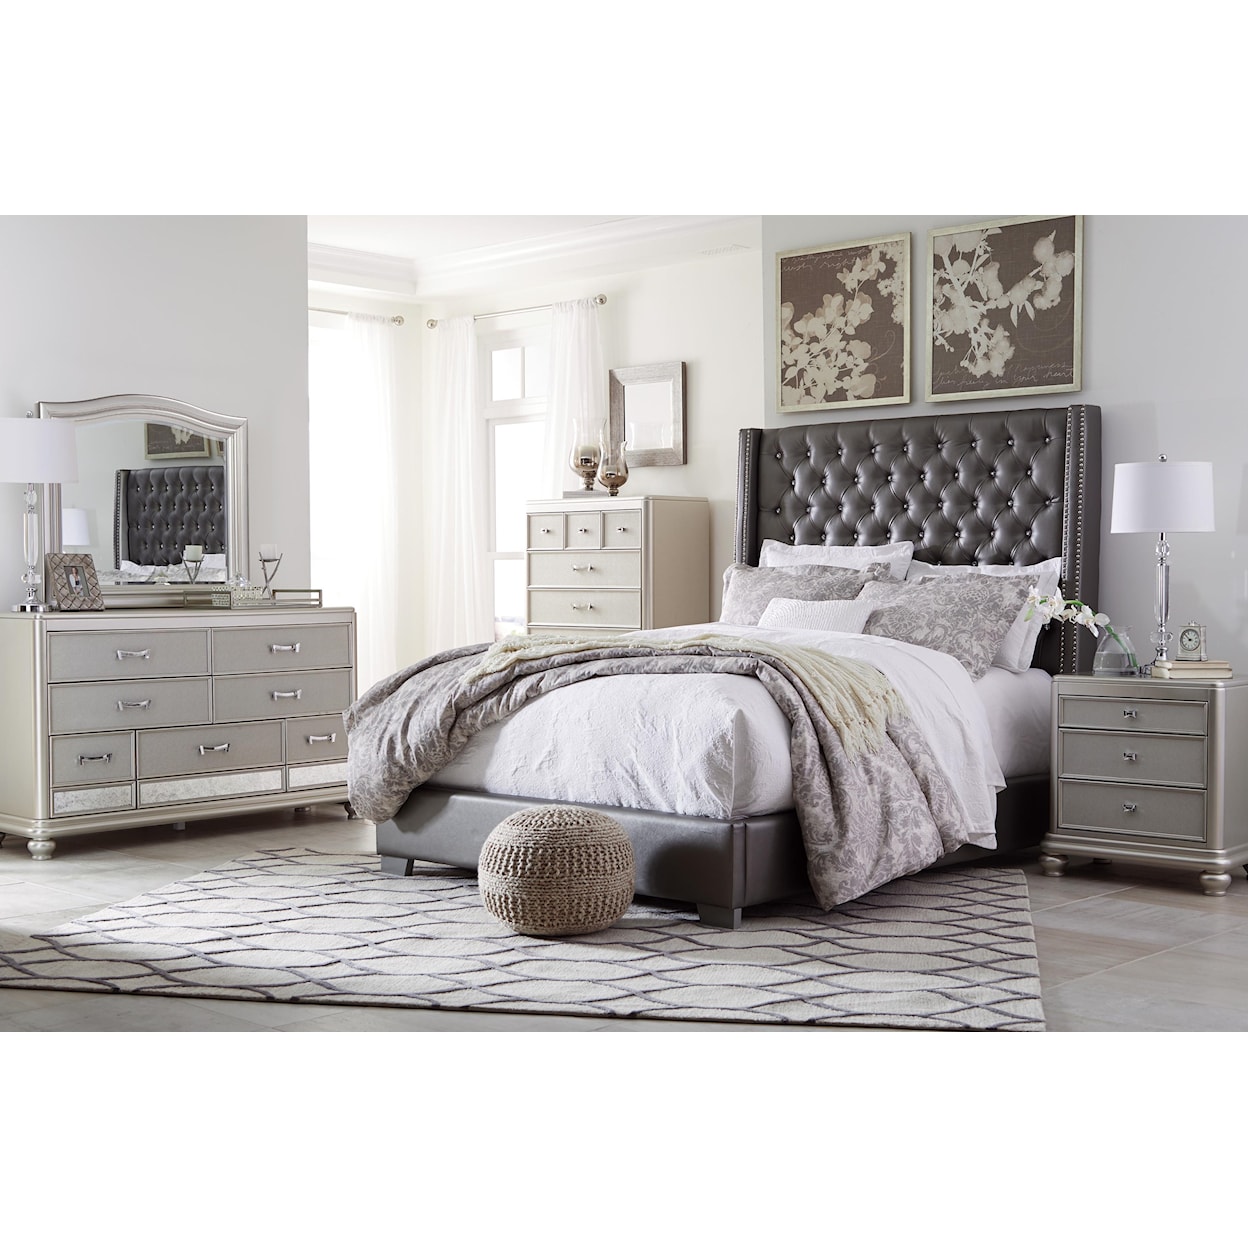 Signature Design by Ashley Coralayne 6 Piece Upholstered King Bedroom Set